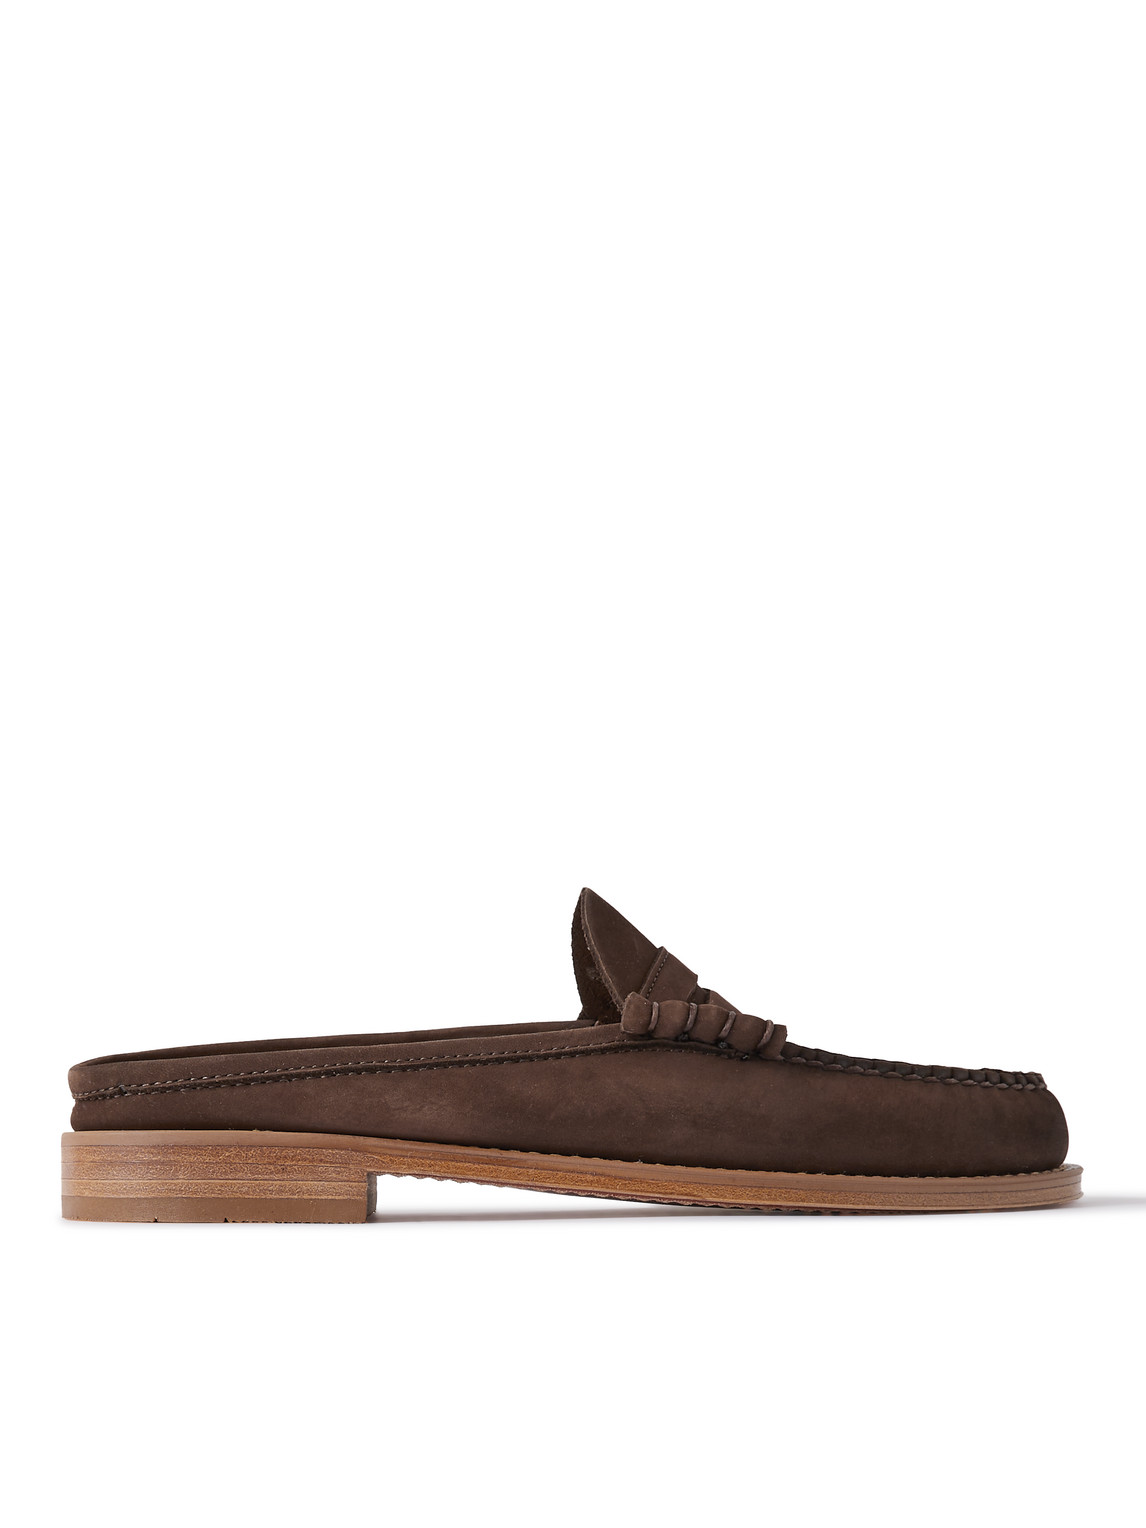 G.H. BASS & CO. WEEJUNS HERITAGE SUEDE BACKLESS PENNY LOAFERS